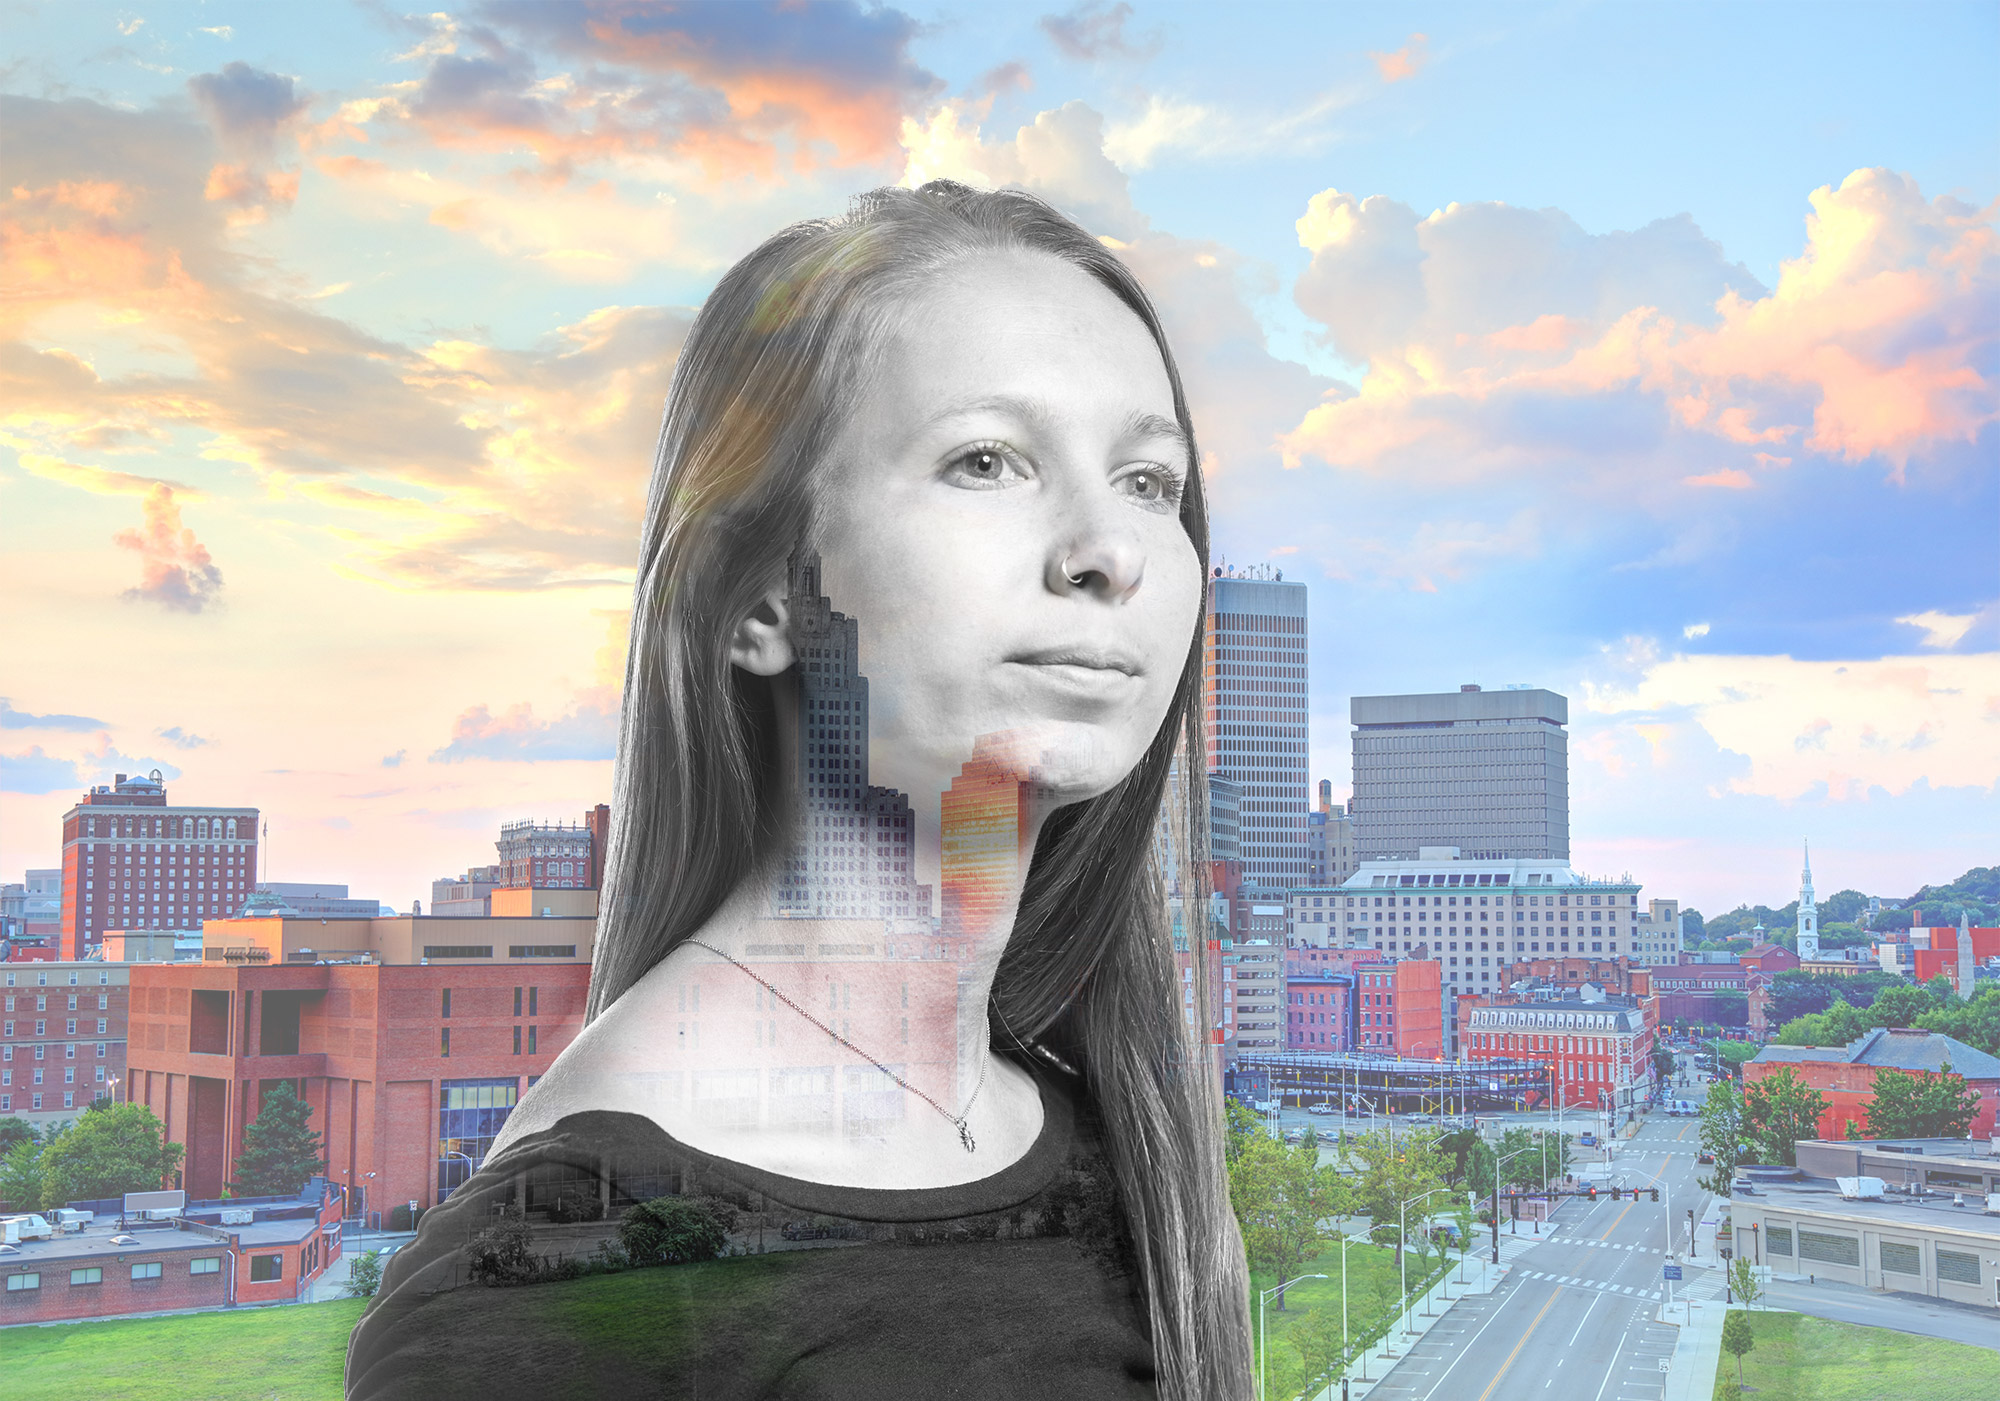 Double exposure portrait of Paige Brochu with the Providence, Rhode Island skyline in the background.